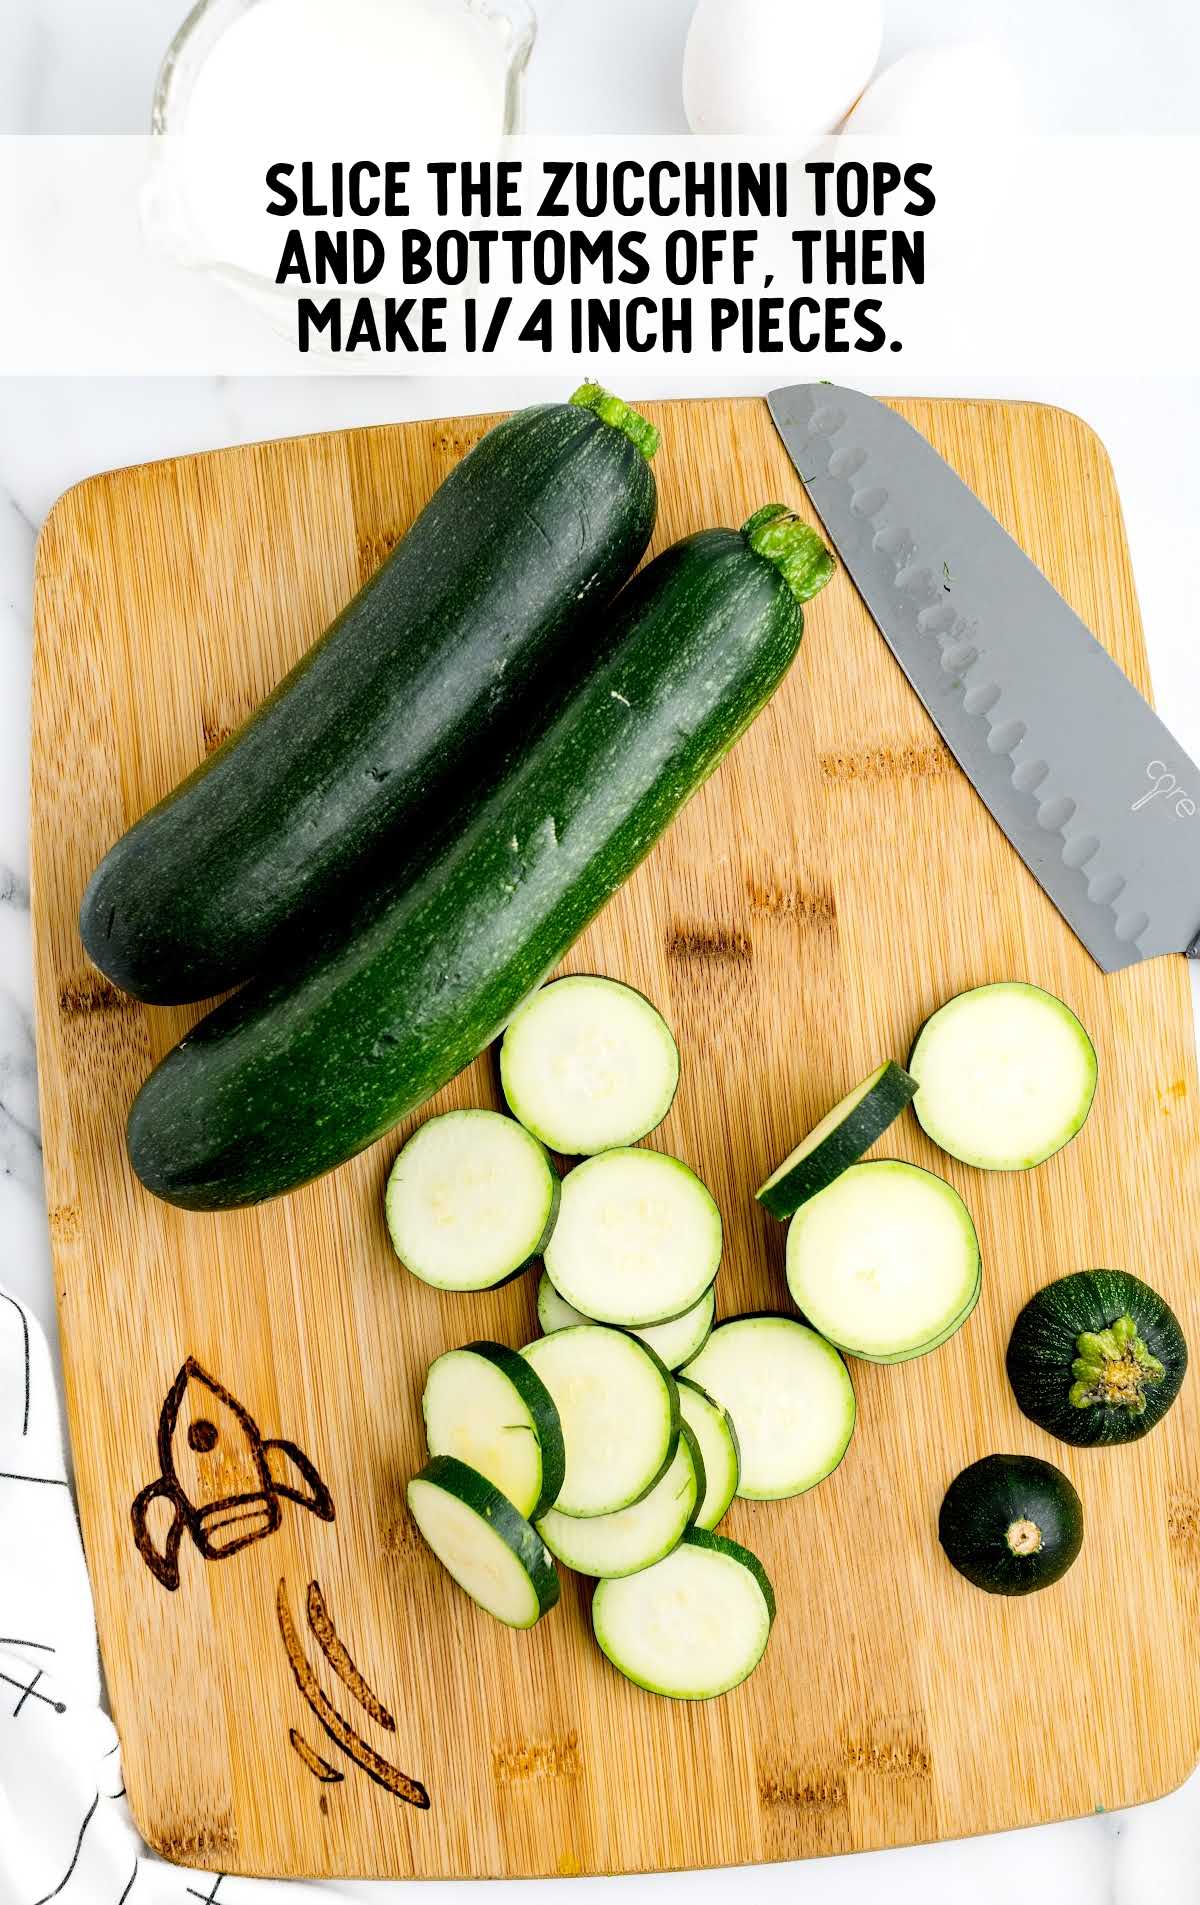 sliced top and bottom of zucchini on a wooden board